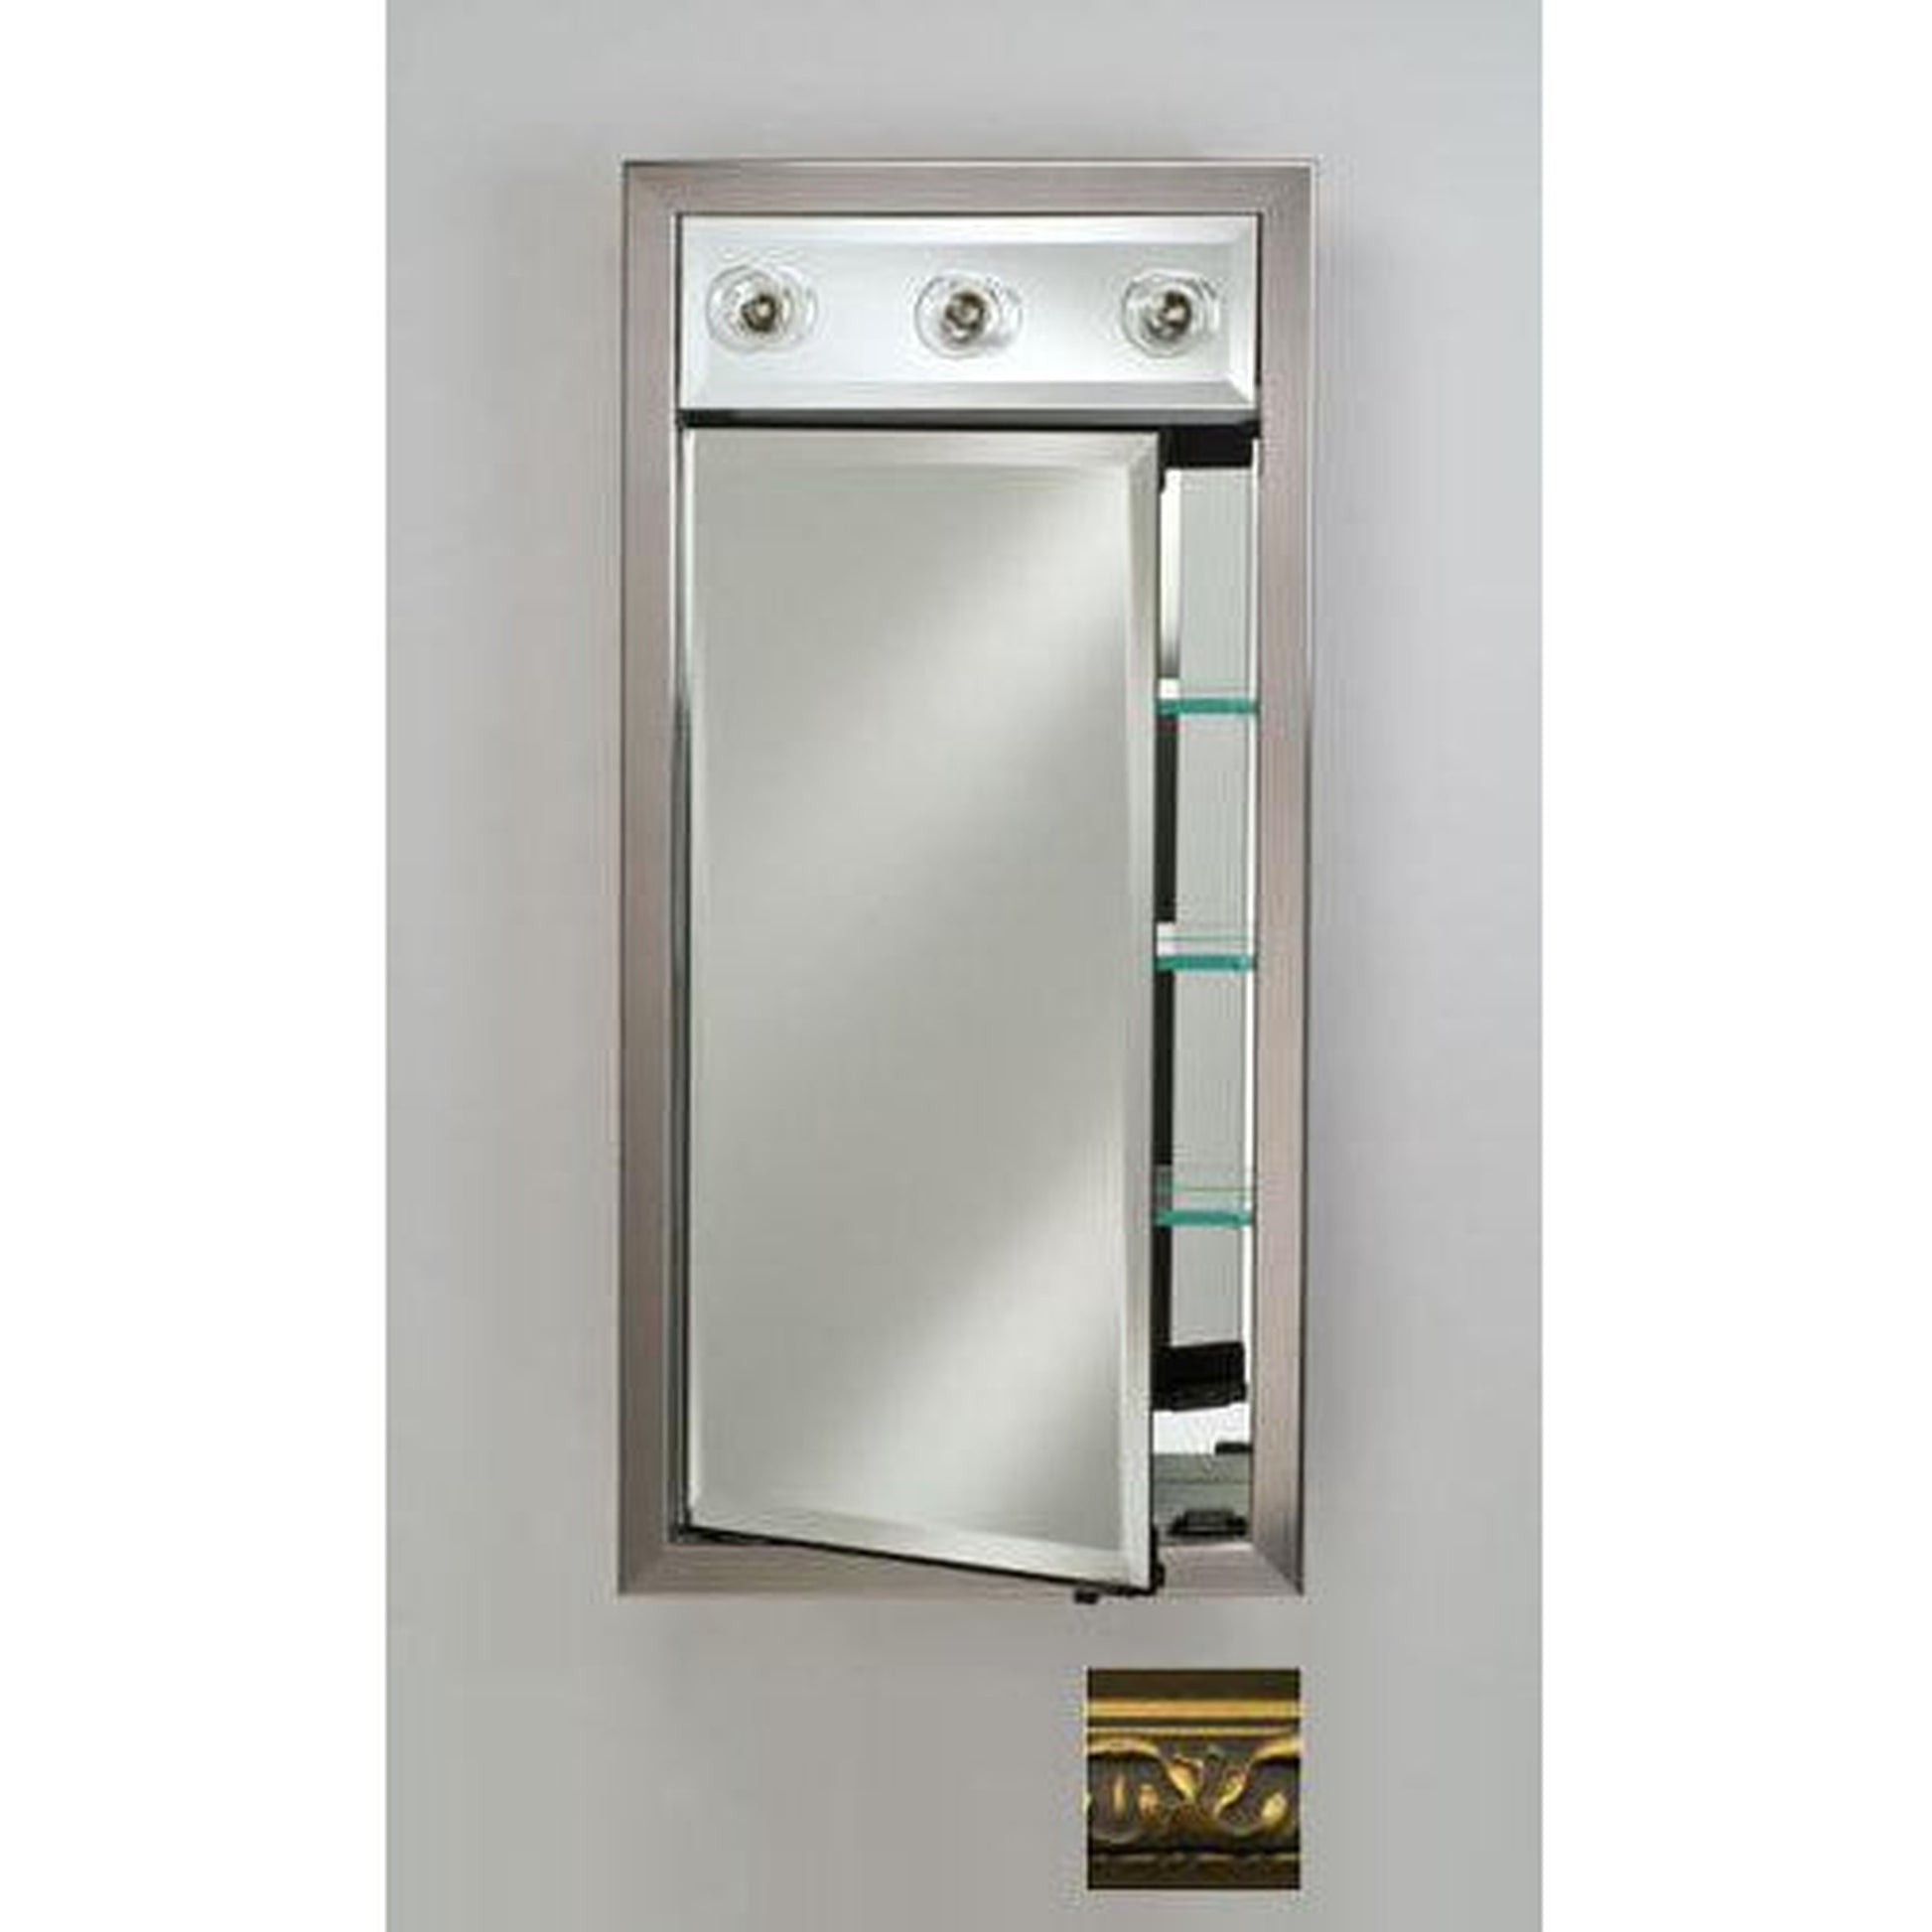 Afina Signature 17" x 30" Valencia Antique Gold Recessed Right Hinged Single Door Medicine Cabinet With Contemporary Lights